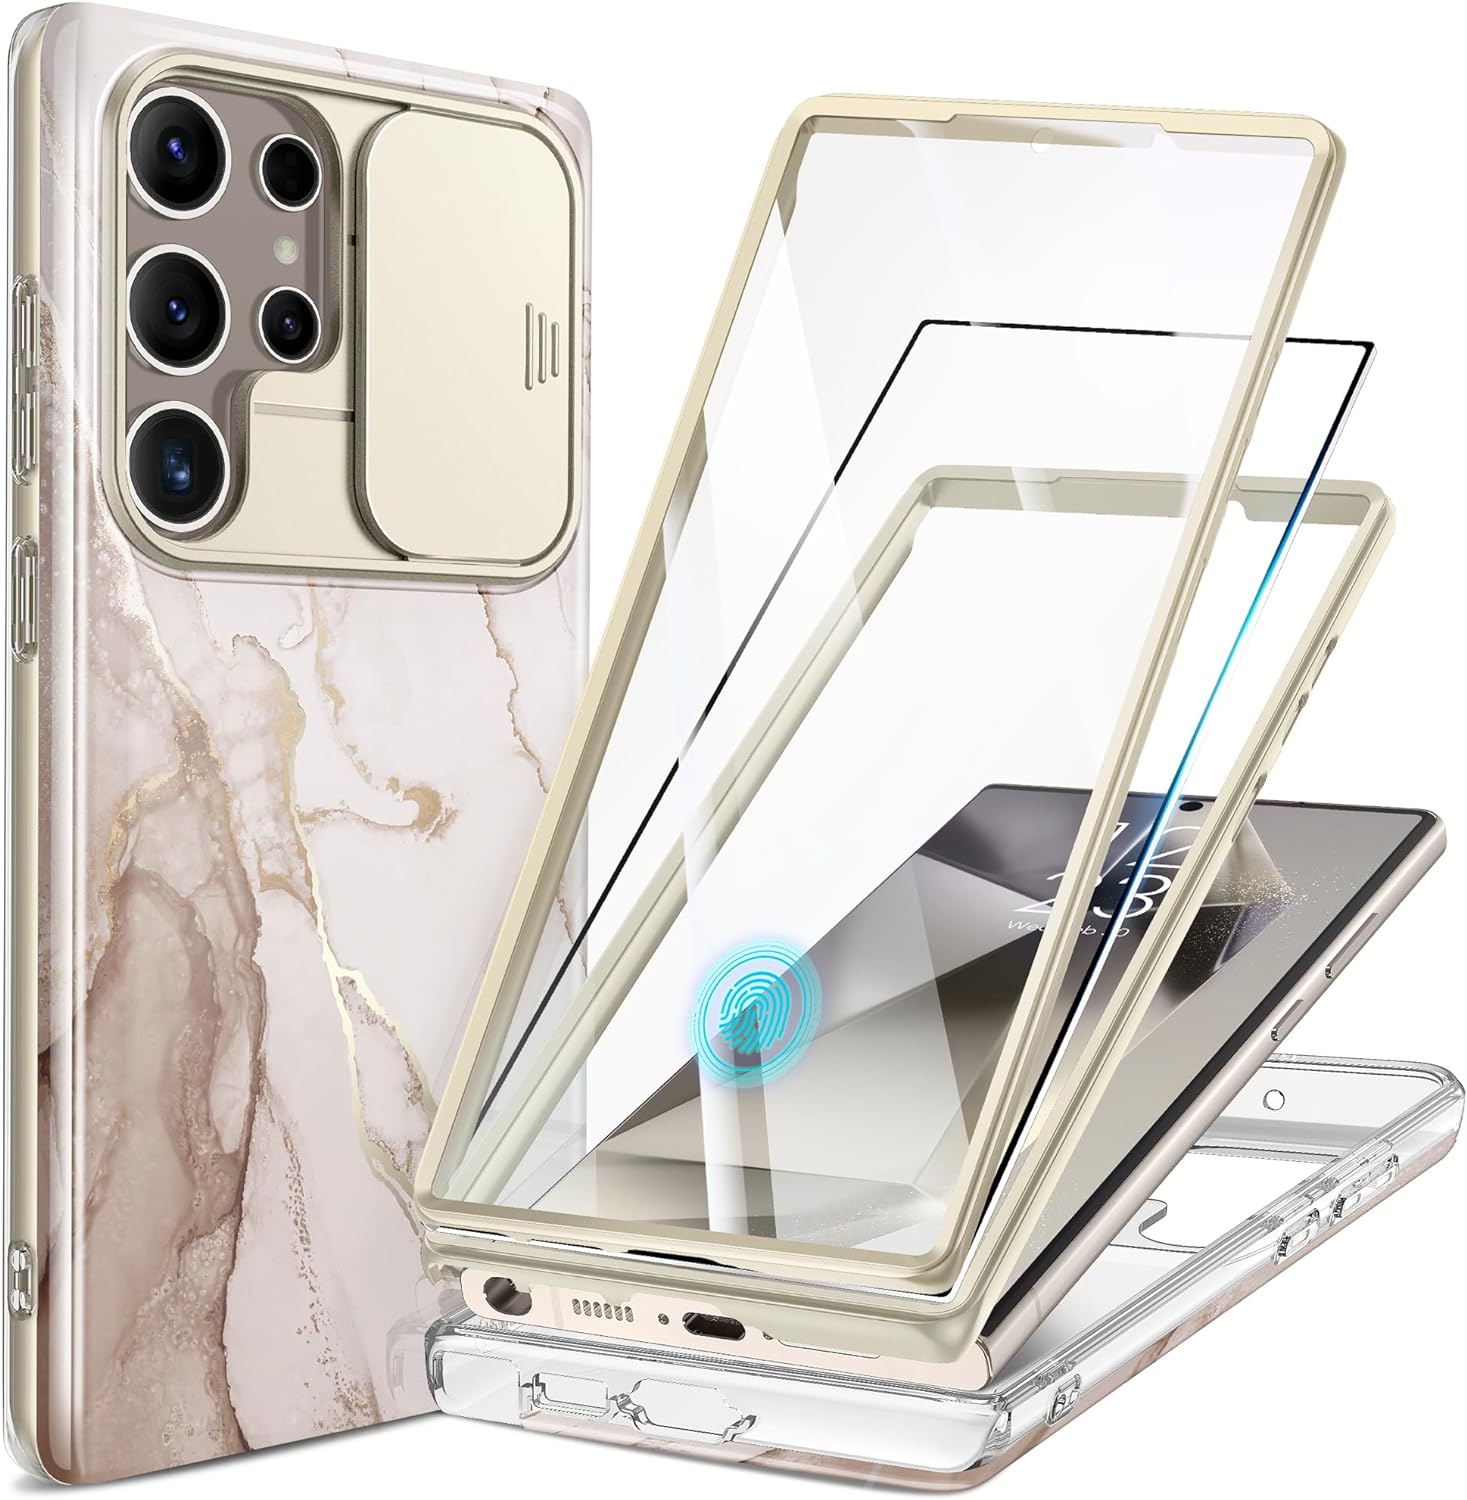 GVIEWIN for Samsung Galaxy S24 Ultra Case, [Slide Camera Cover & Built-in Screen Protector] [2 Front Frame] Military Grade Shockproof Marble Phone Case Cover 6.8 (Shweta/Beige)